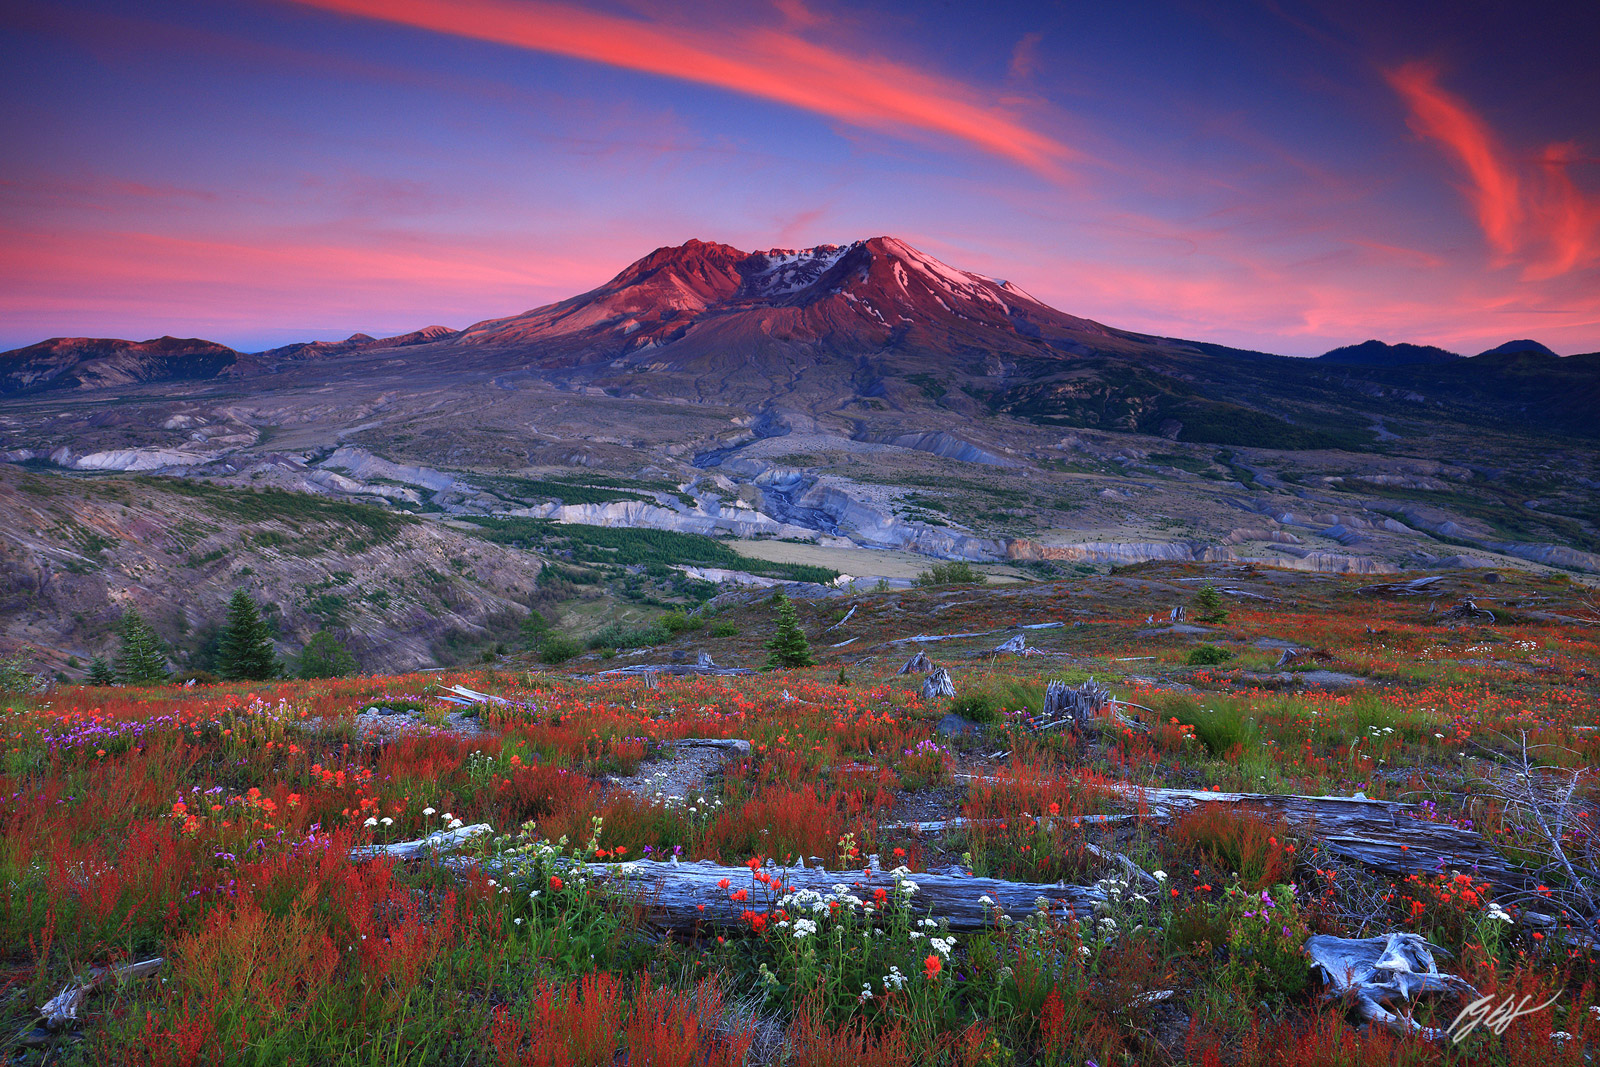 Sunset Wildflowers and Mt St Helens from Johnston Ridge in Mt St Helens National Volcanic Monument in Washington